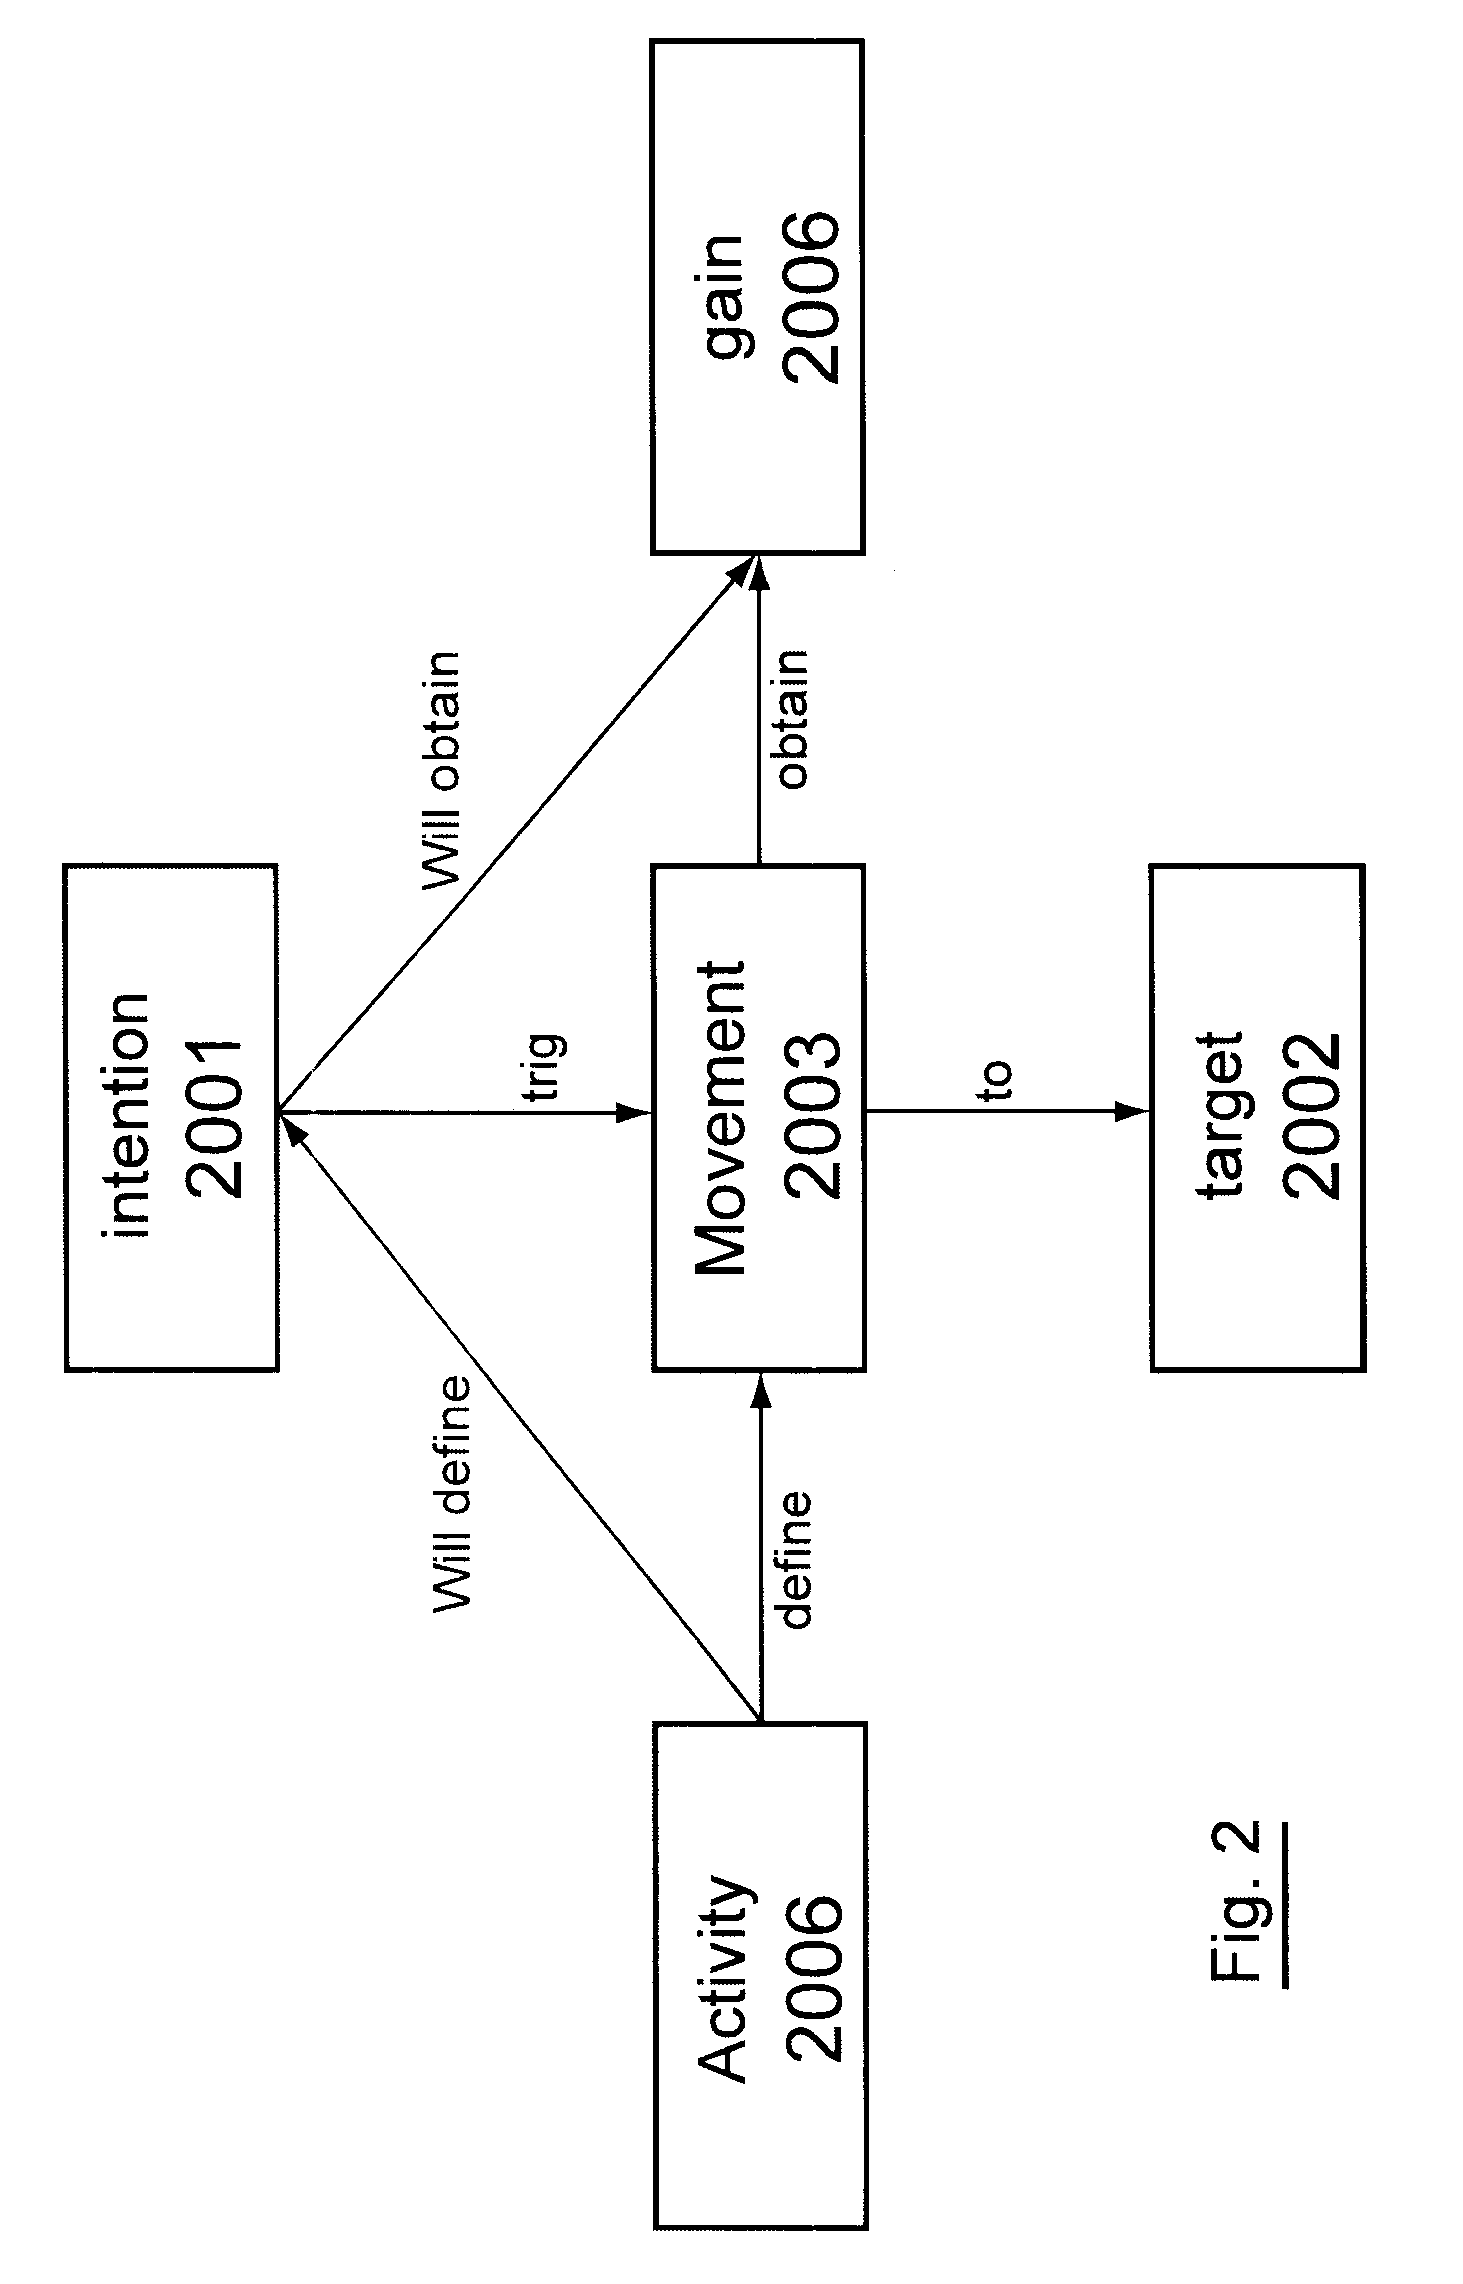 Monitoring a message associated with an action